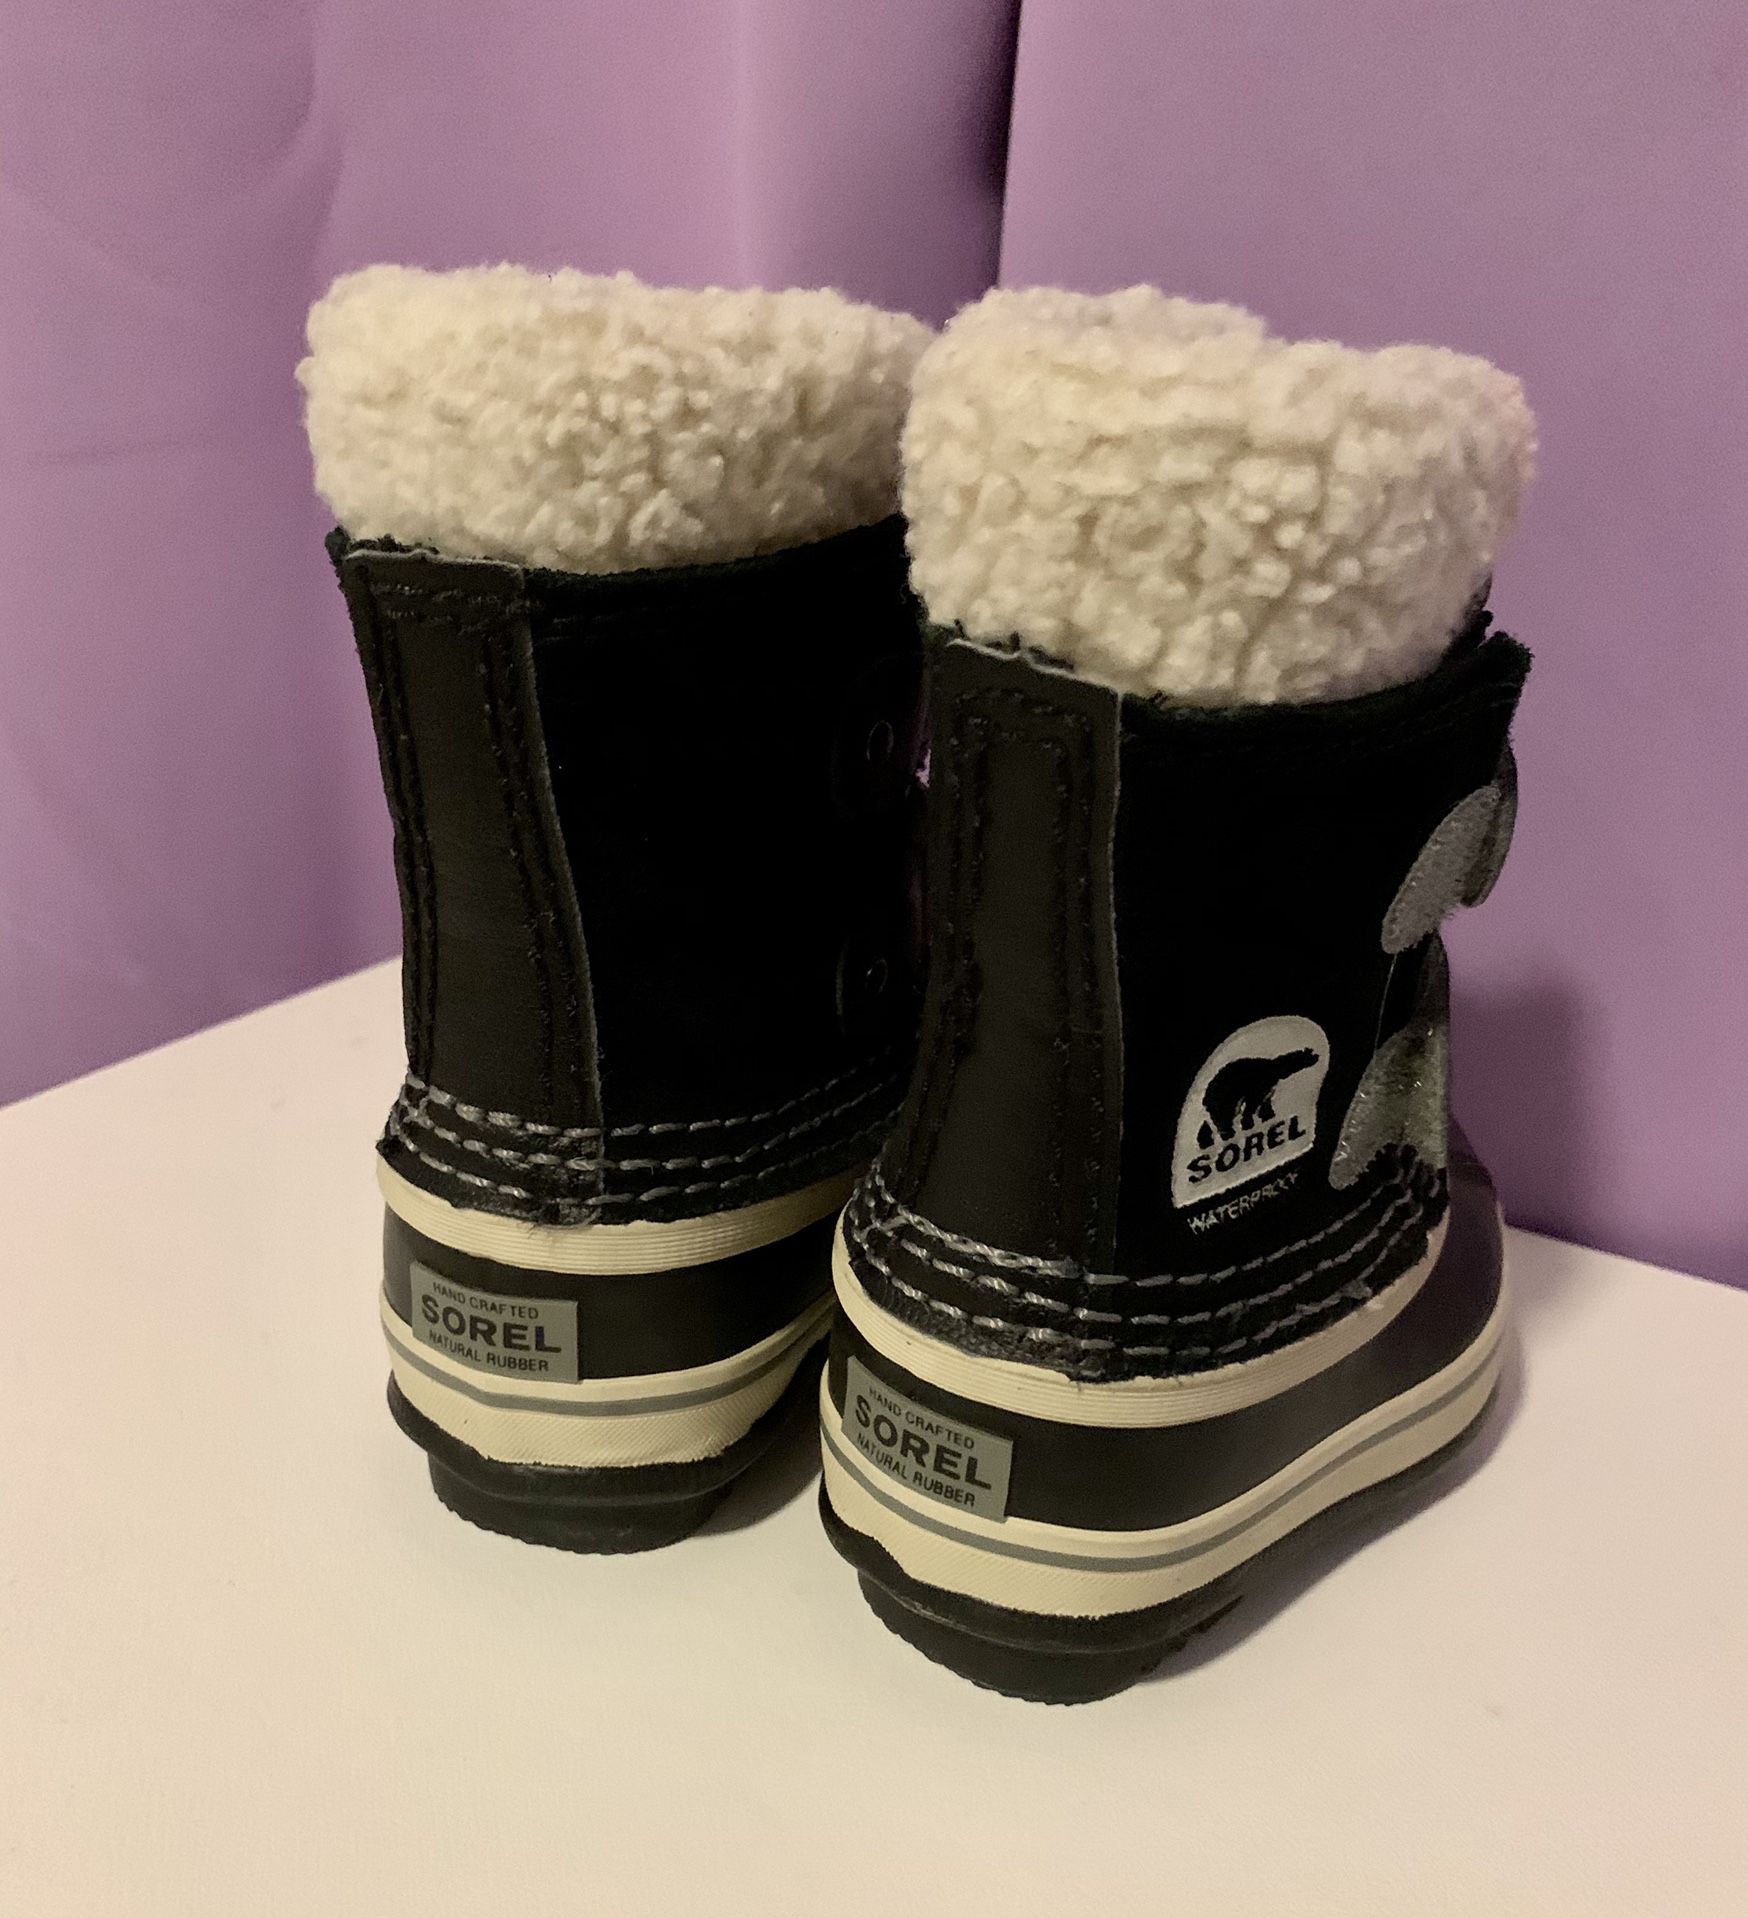 Kids Sorel Snow Boots, Size 4, Used Once.